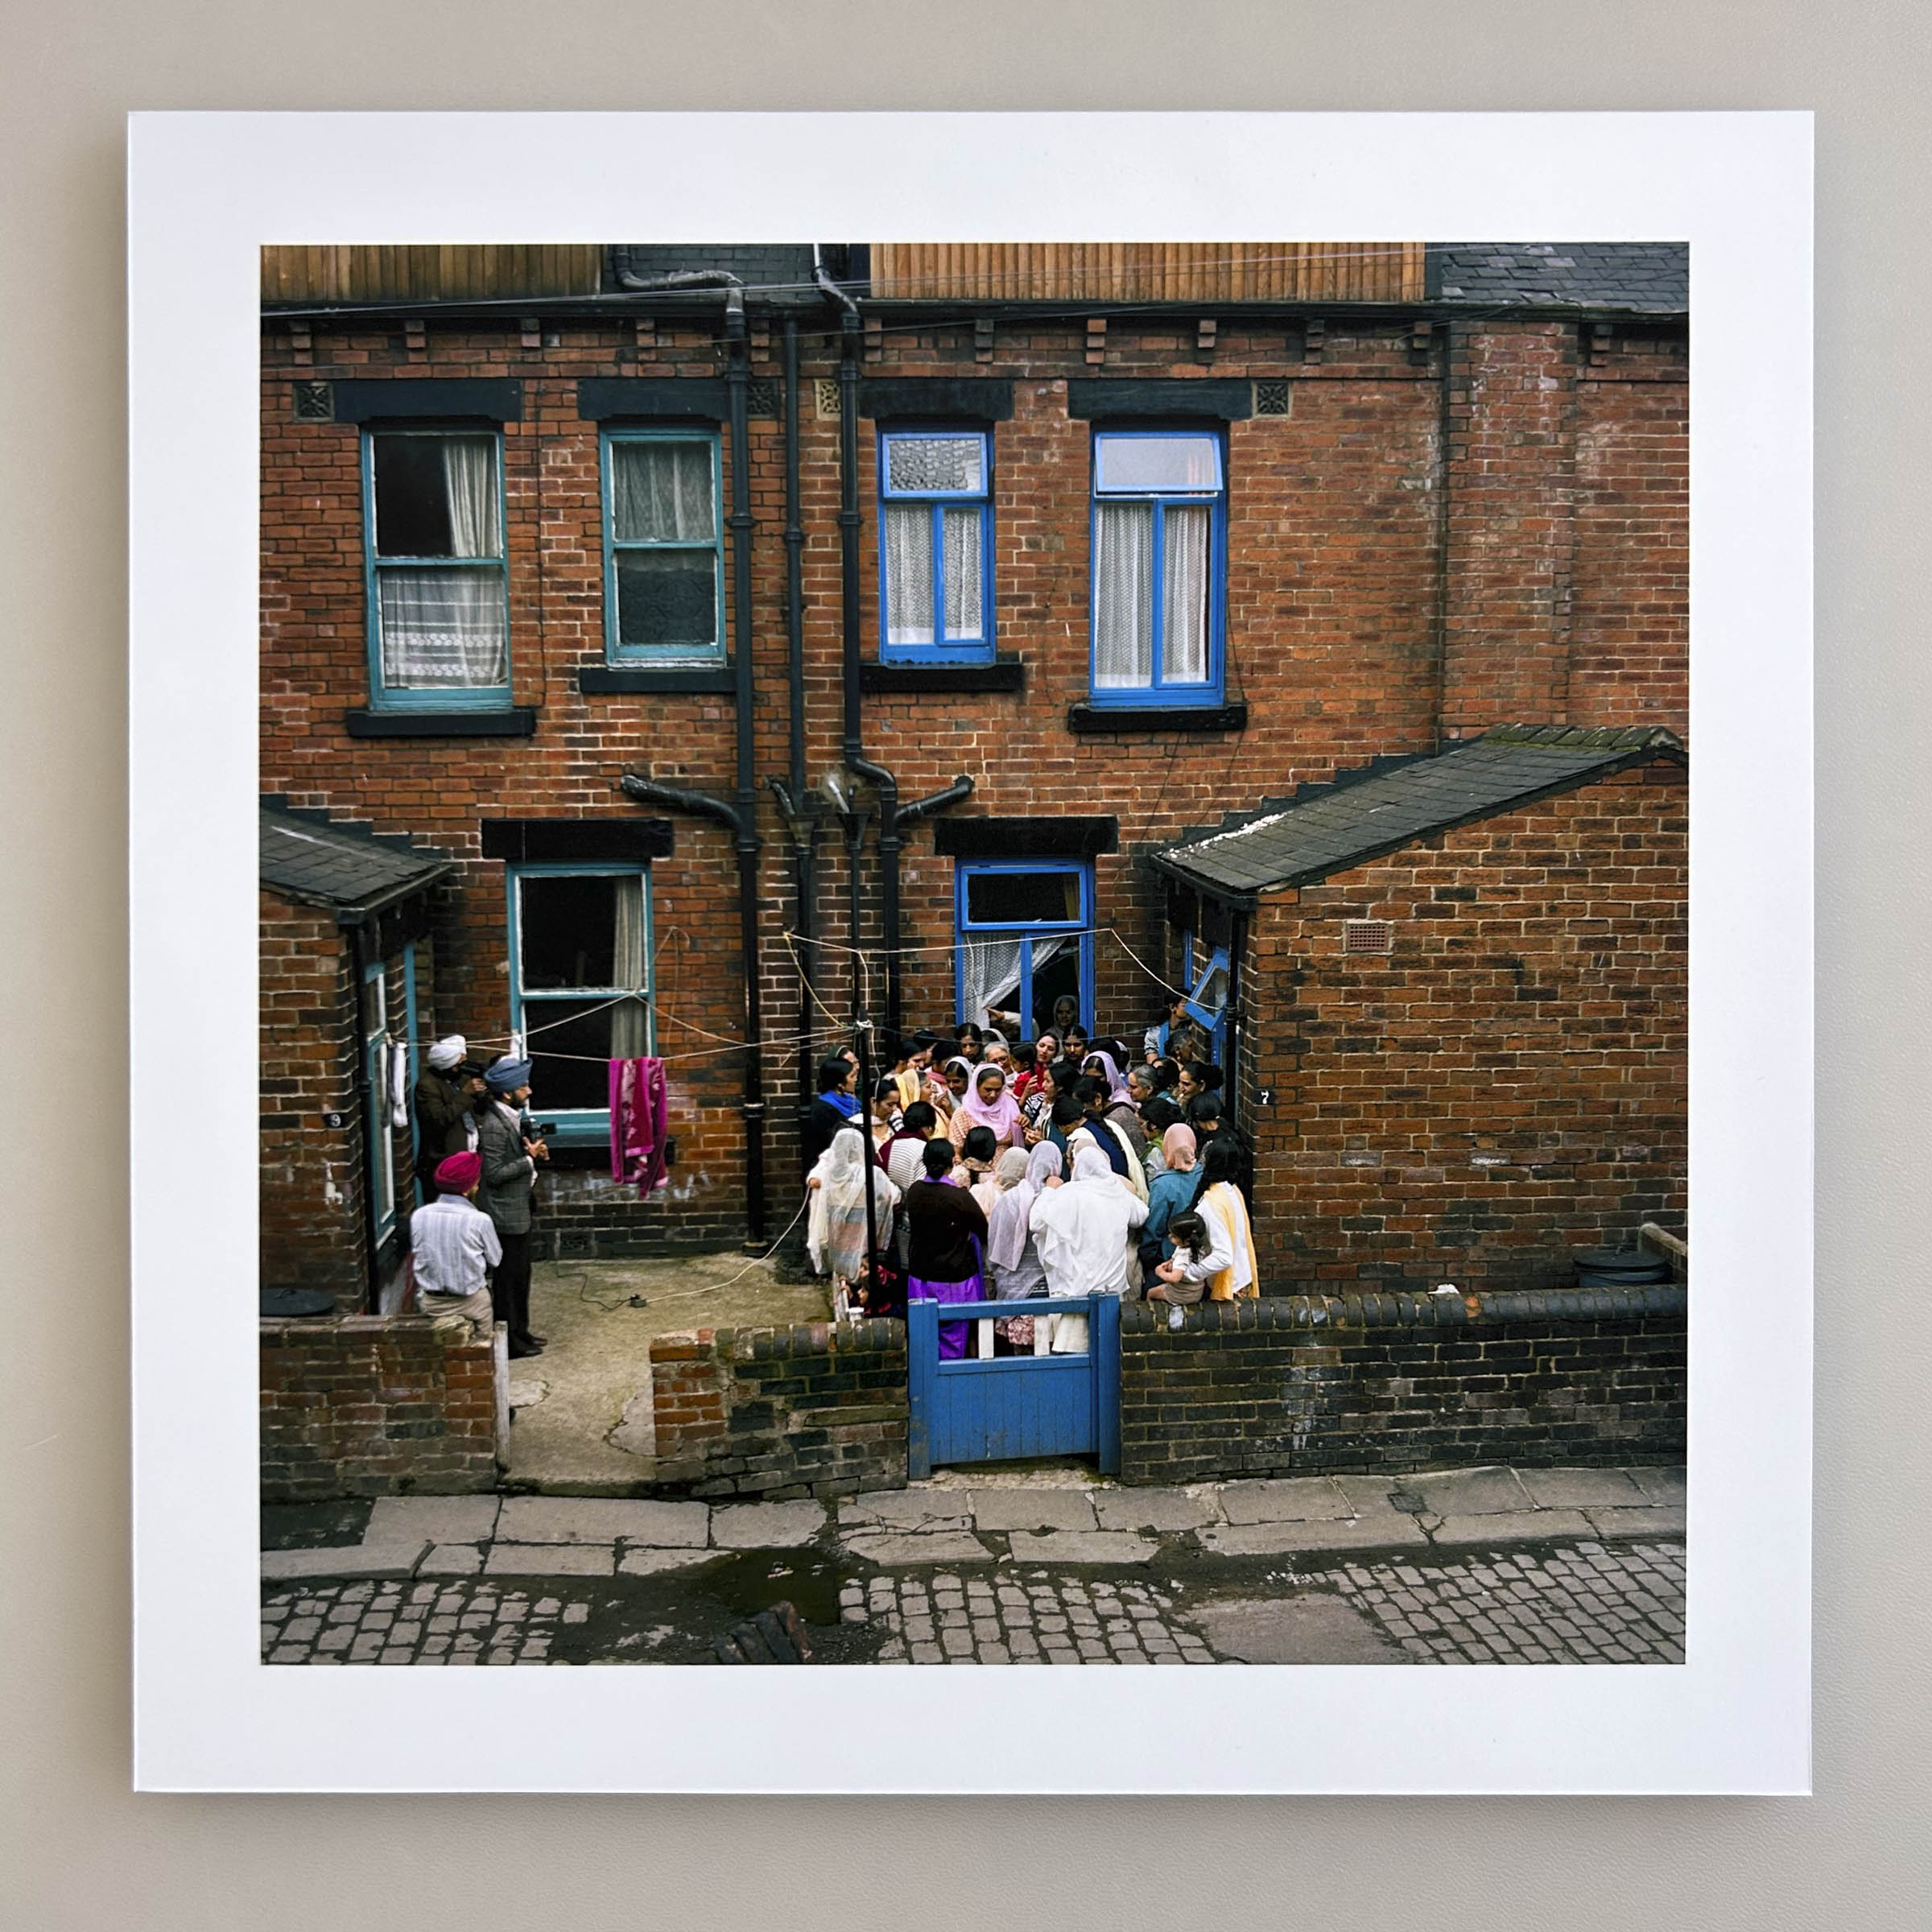 Mounted Exhibition Print - 'How Many Aunties?', Back Hares Mount, Leeds, 1978